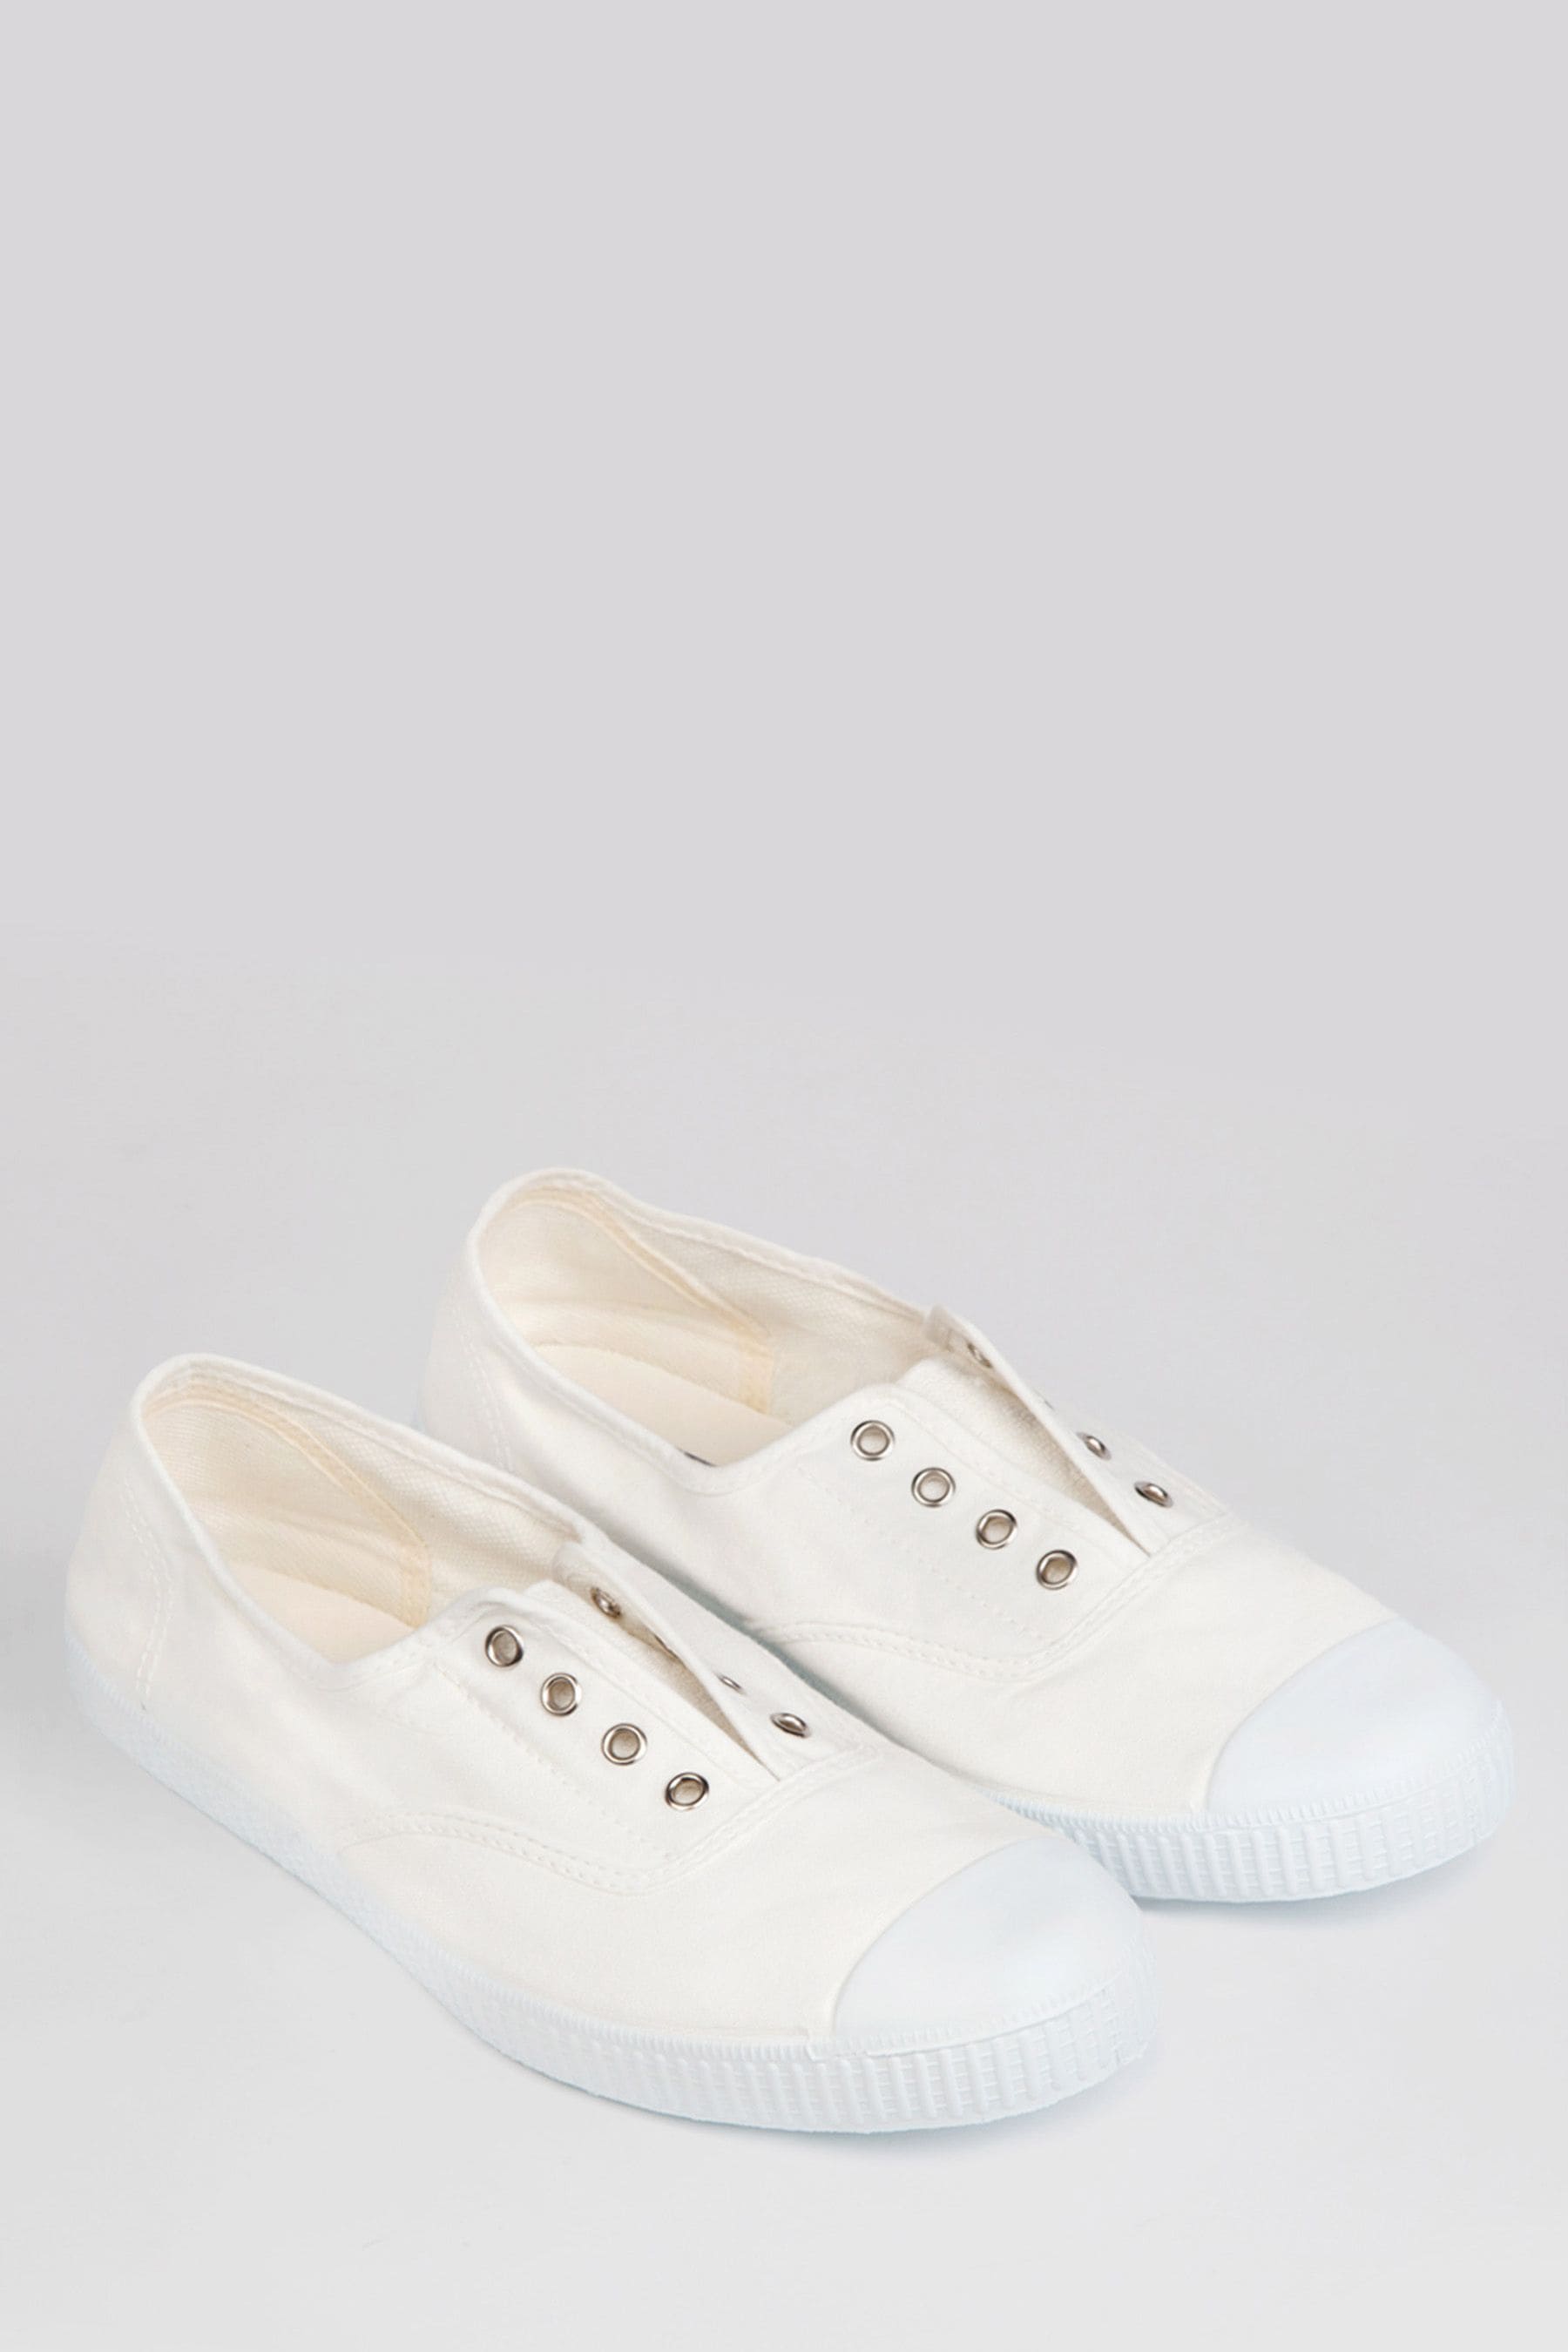 Buy Trotters London White Adult Plum Canvas Shoes from the Next UK ...